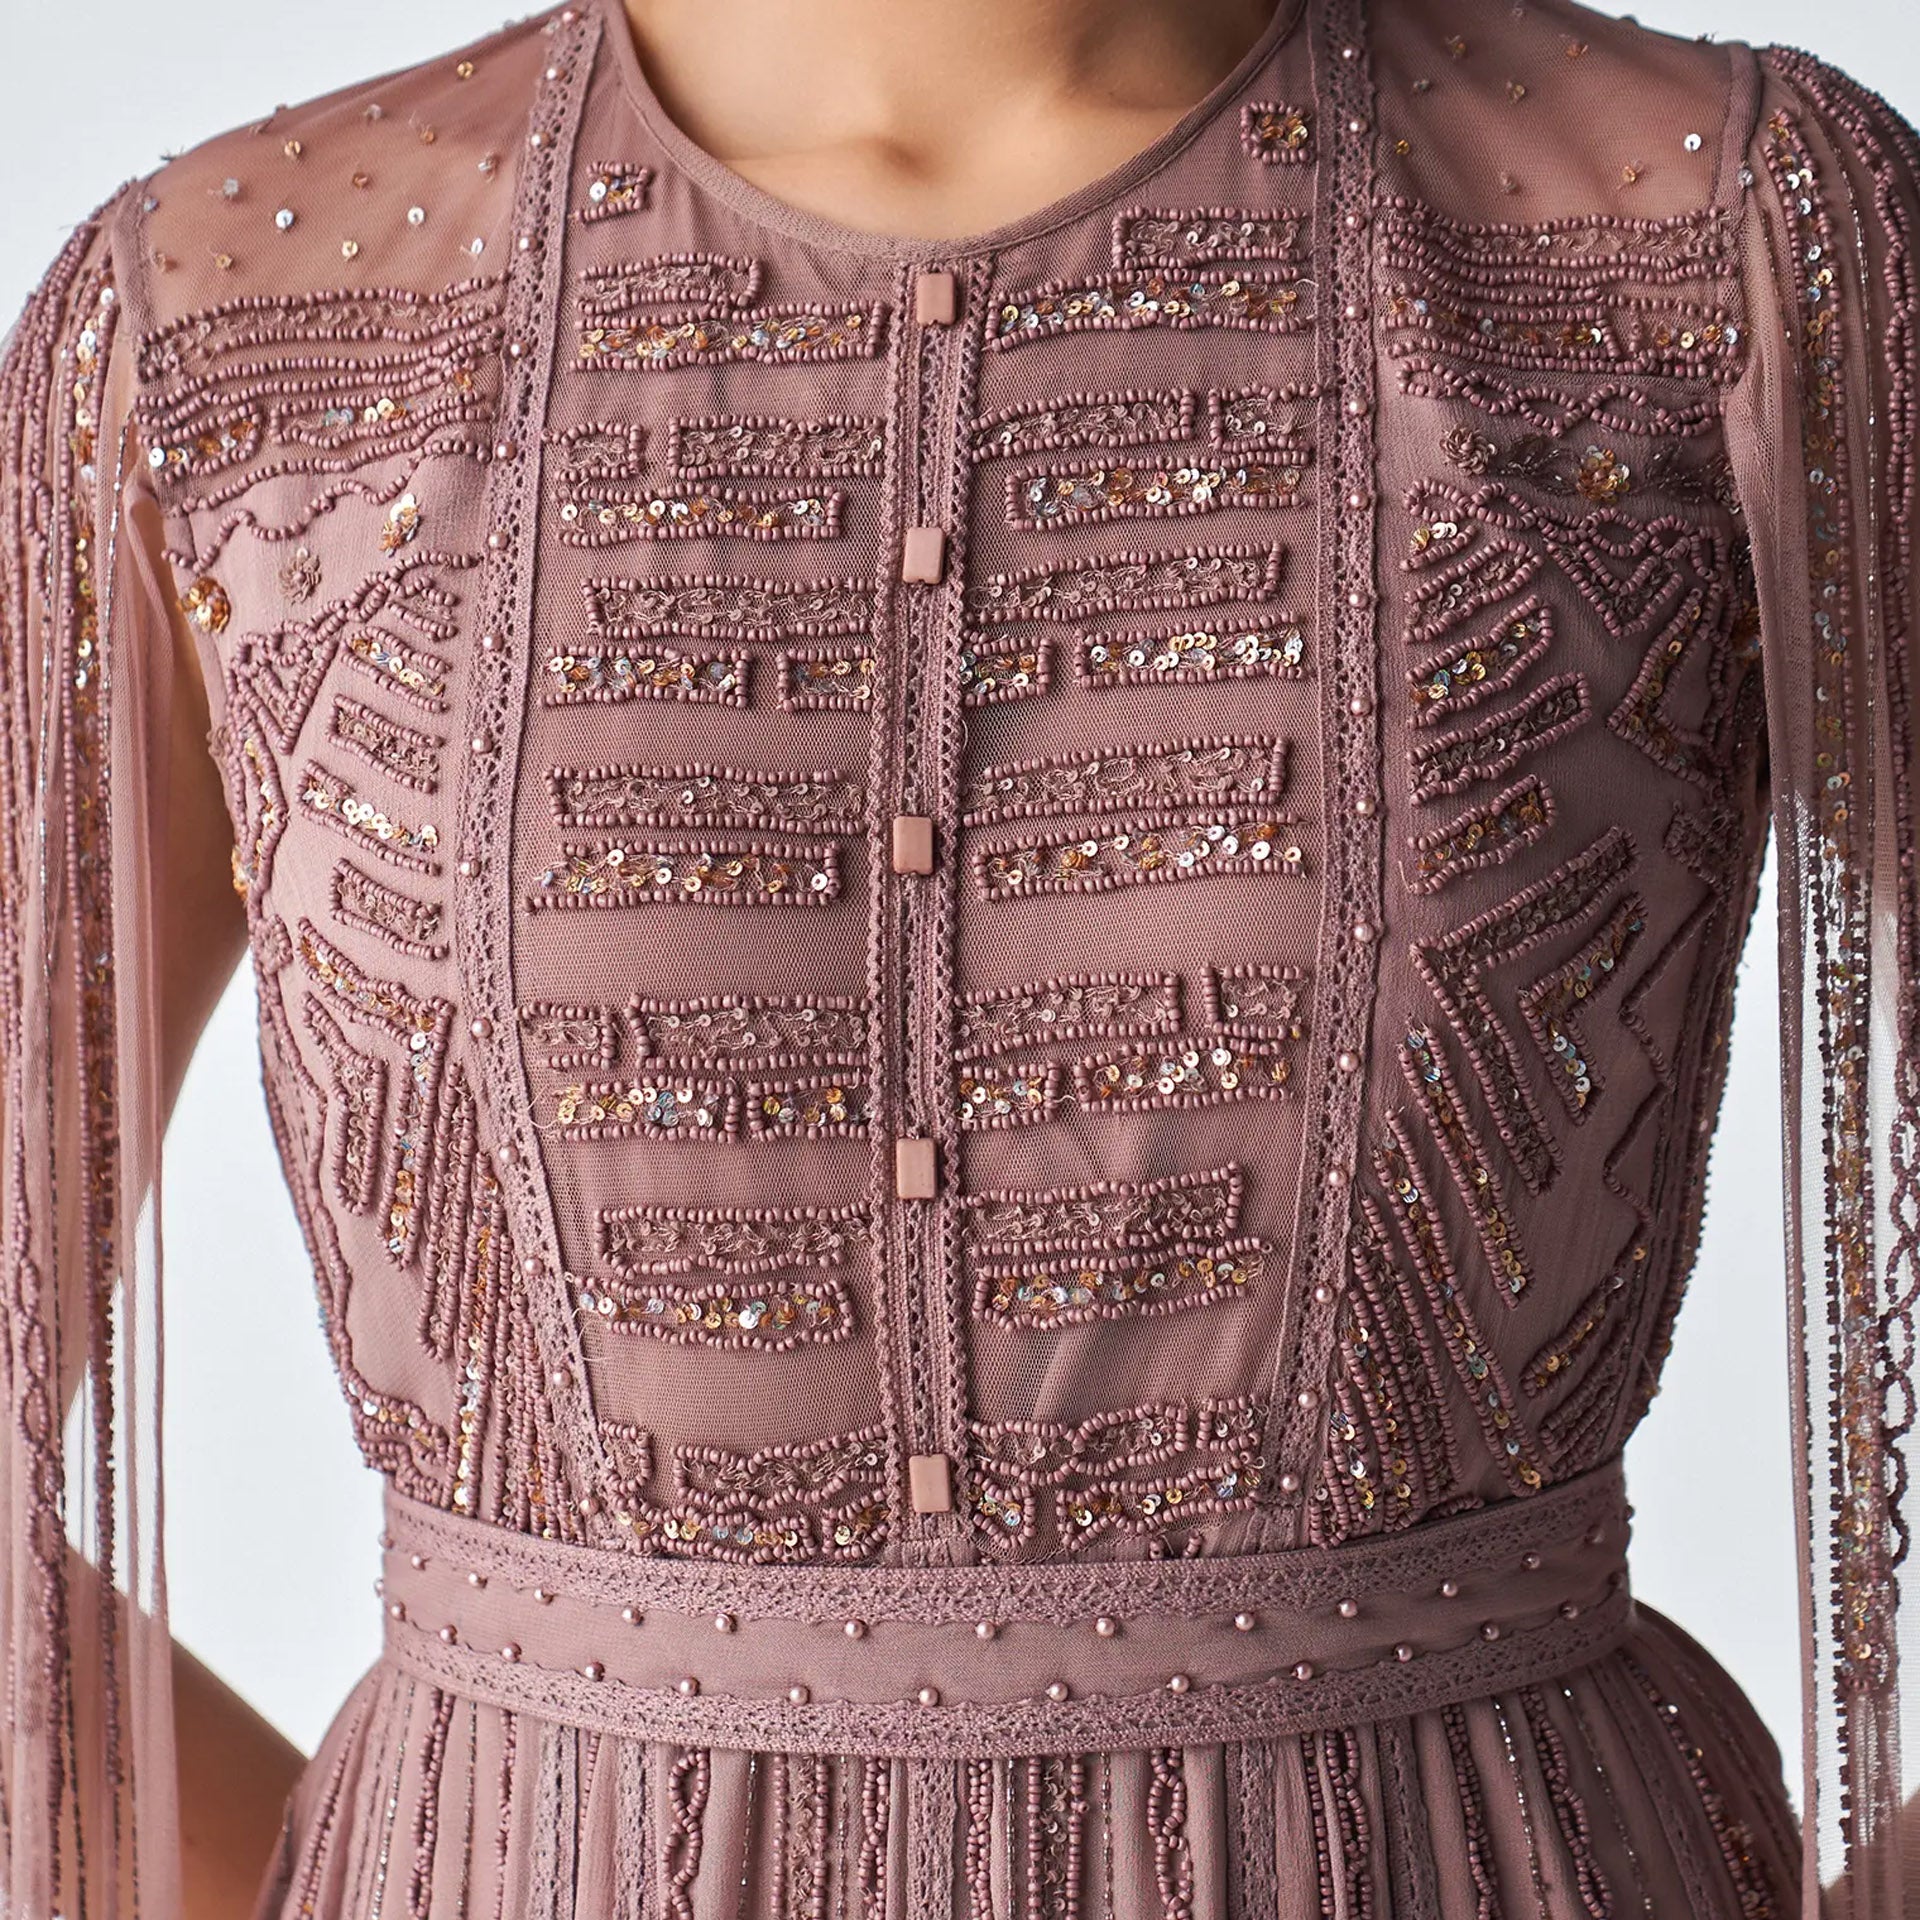 Light Brown Embroidery Dress with Long Sleeves From Shalky